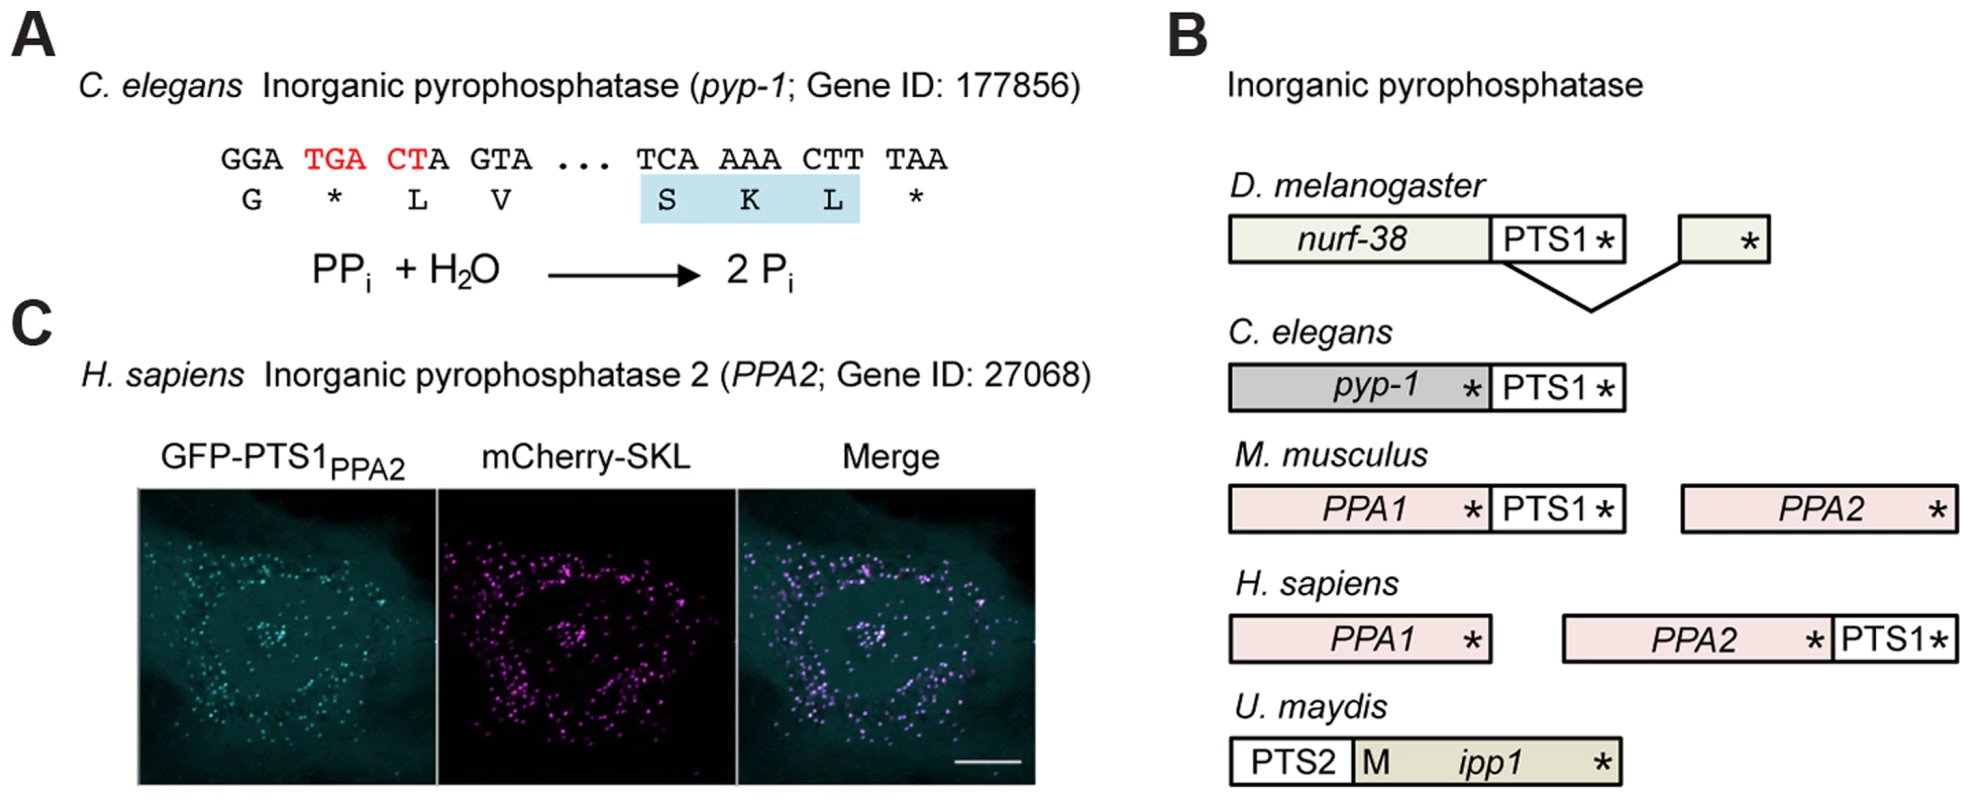 Inorganic pyrophosphatase is targeted to peroxisomes in different species by various mechanisms.